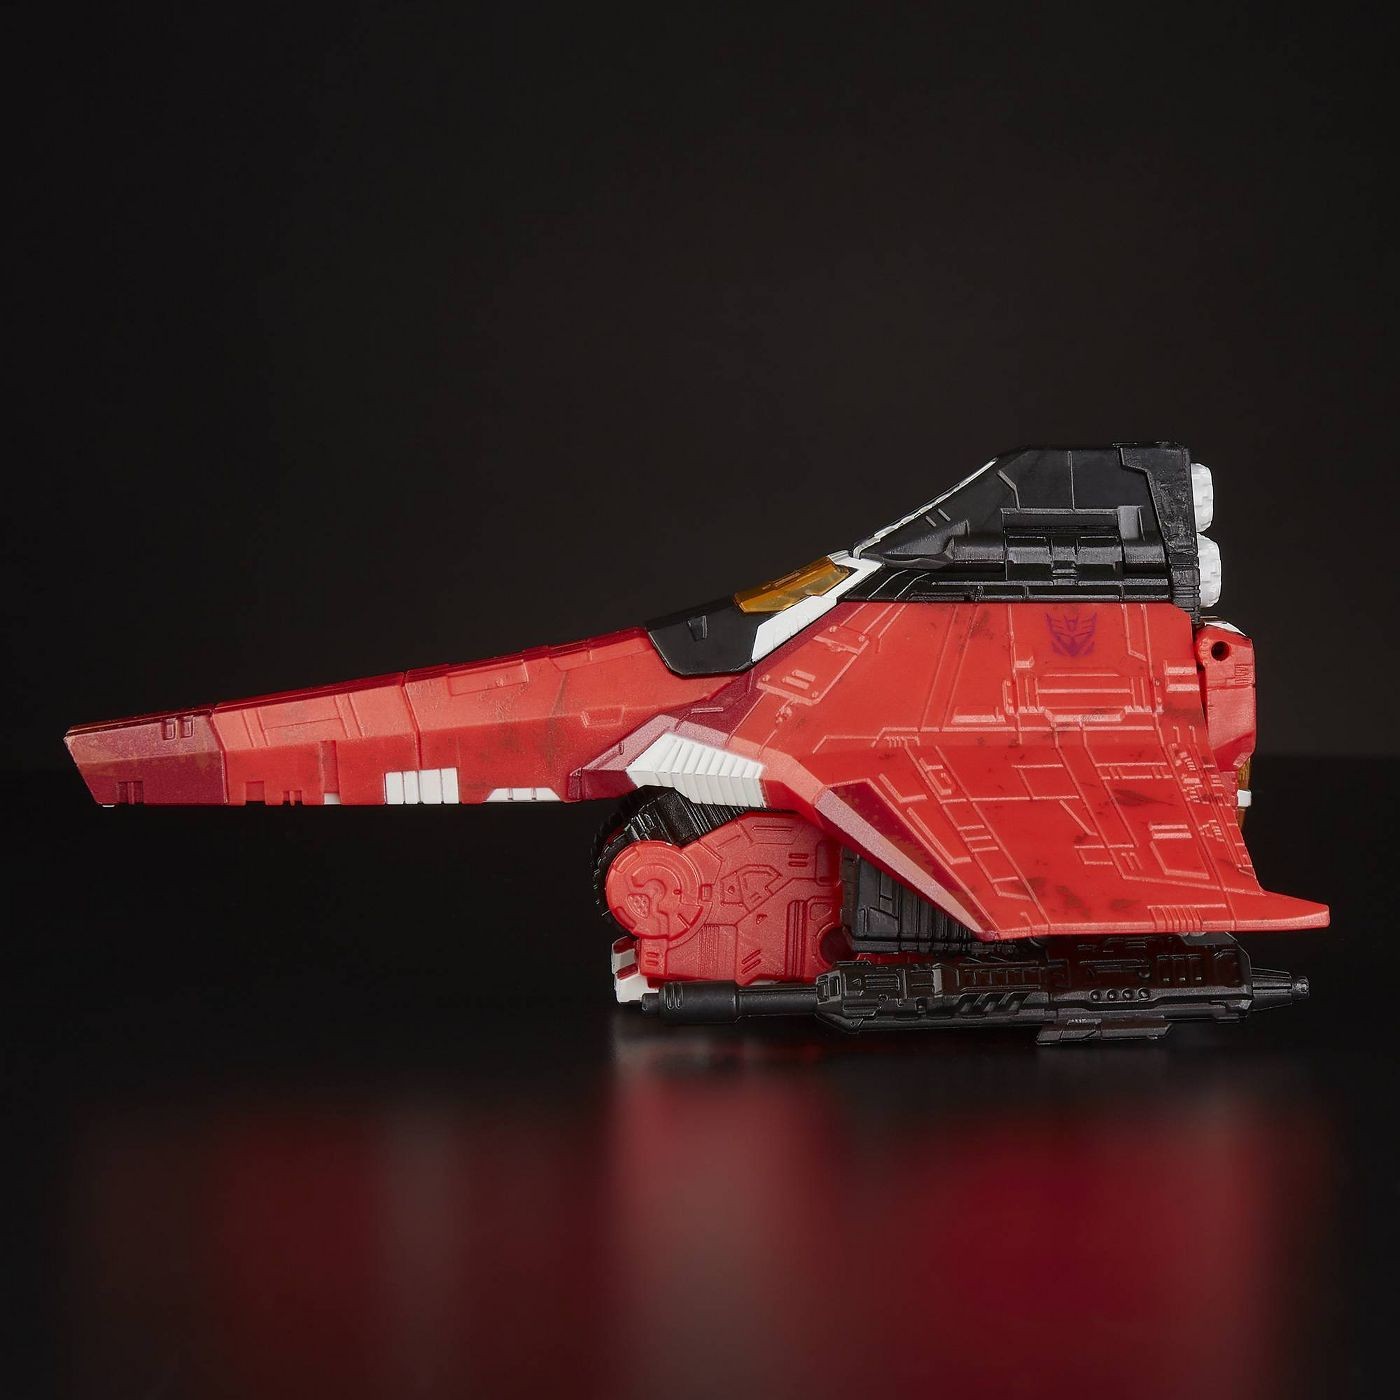 Transformers News: Transformers Generations SELECTS Red Wing Available for Pre Order As A Target RedCARD Exclusive